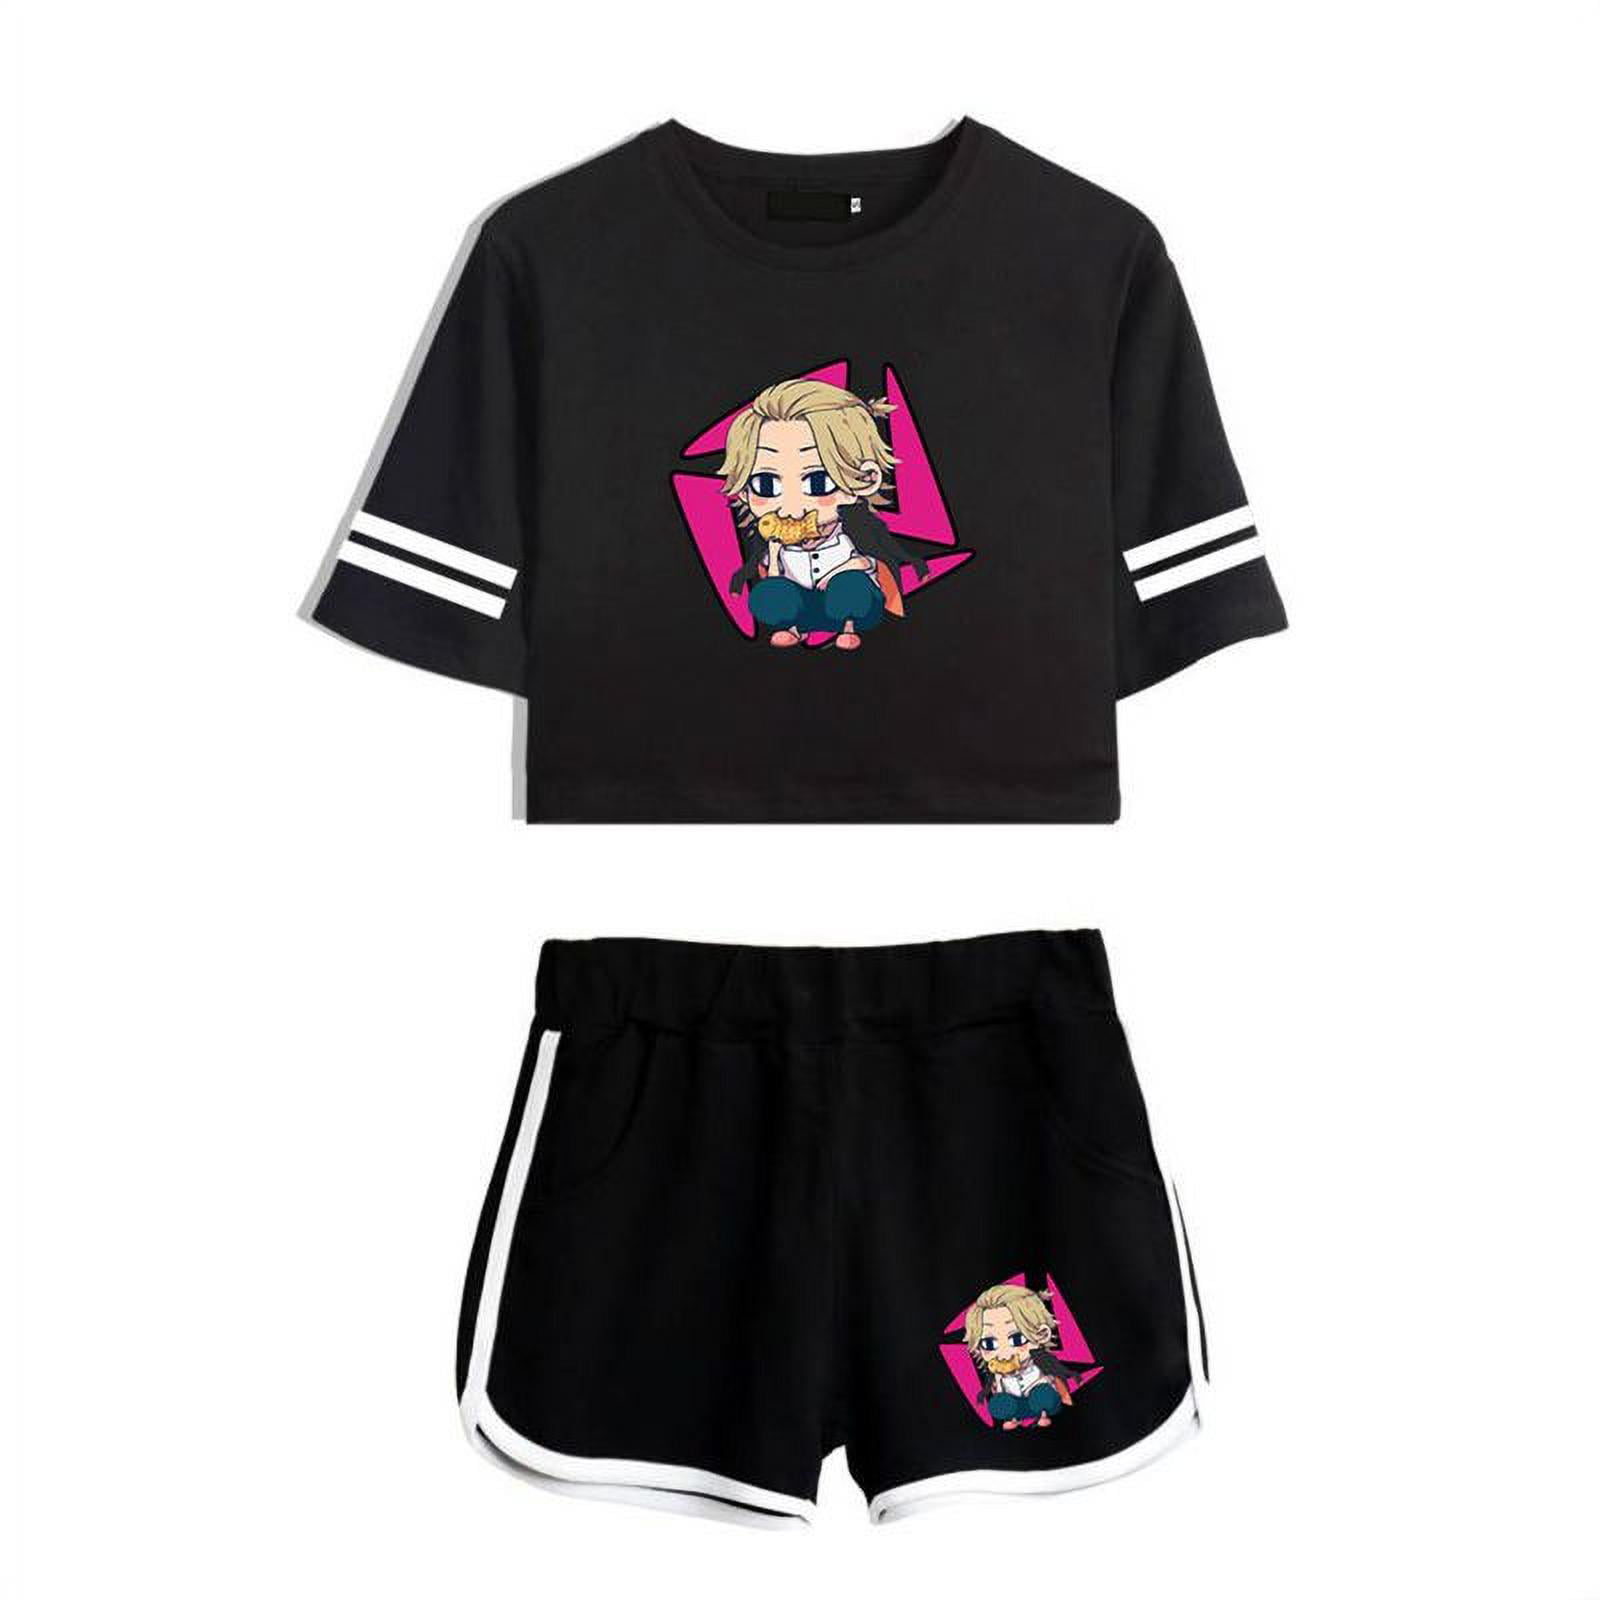 Fortnite T-Shirt and Shorts Set 2 Piece Outfit Clothes Set for Boys Girls 